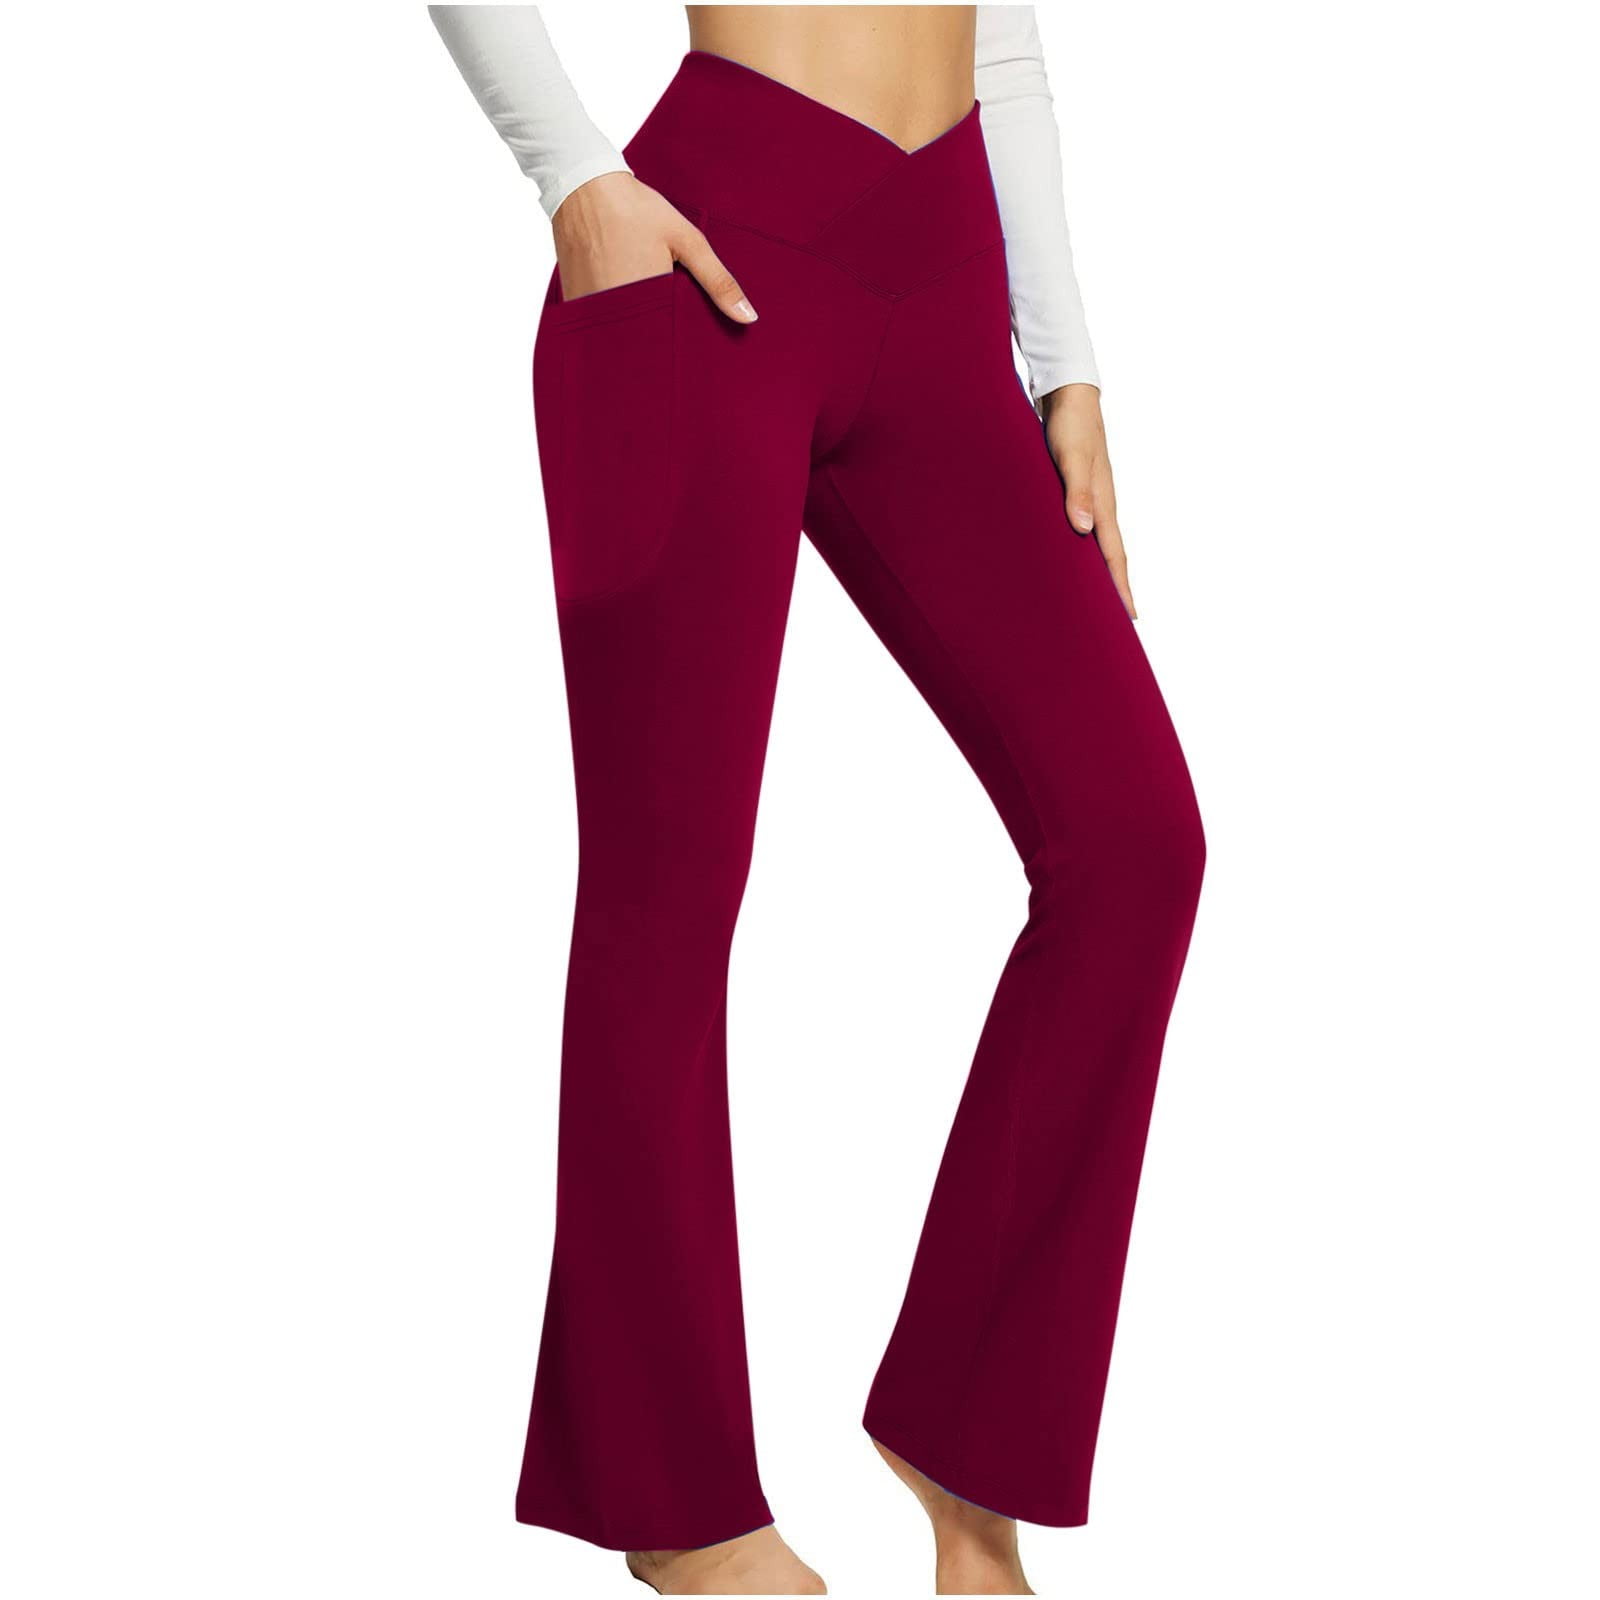 Buy Women's High Waisted Crossover Yoga Pants Boot-Cut Trousers